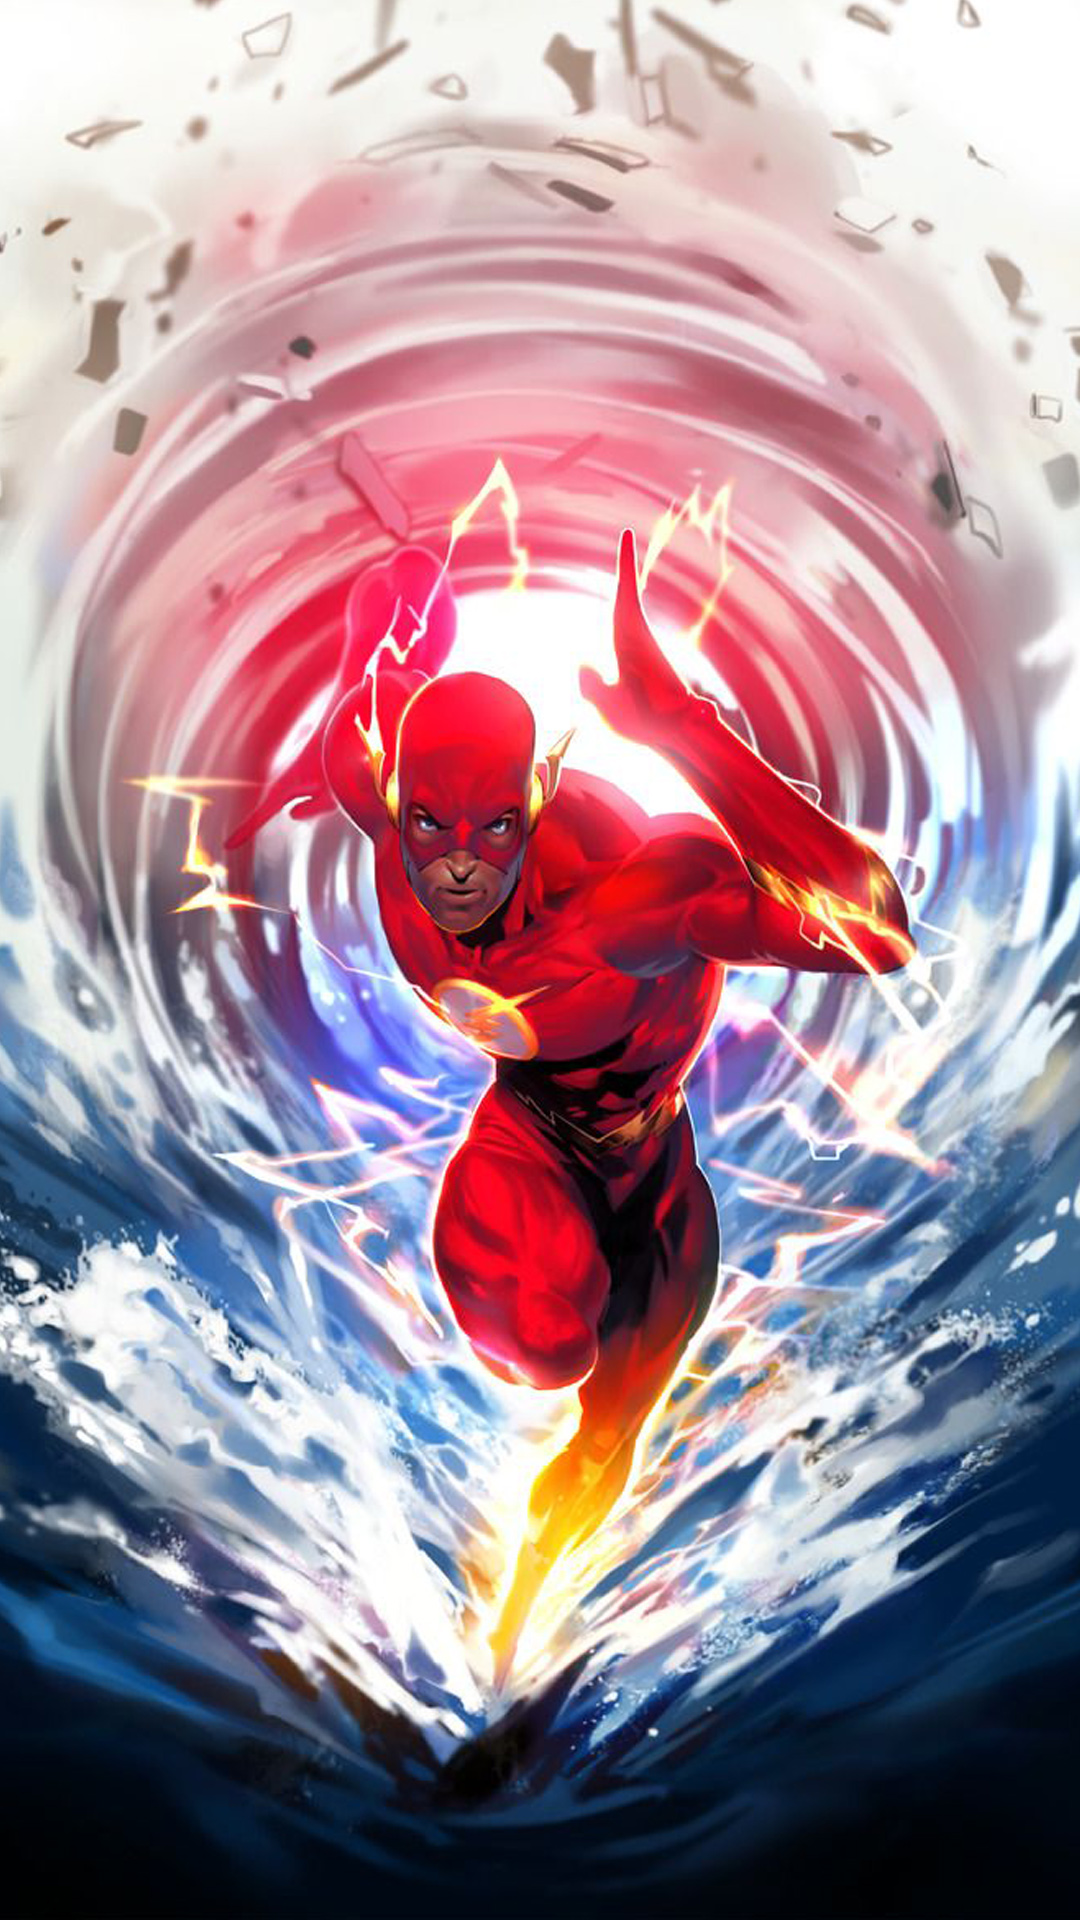 The Flash アメコミ Iphone Wallpapers